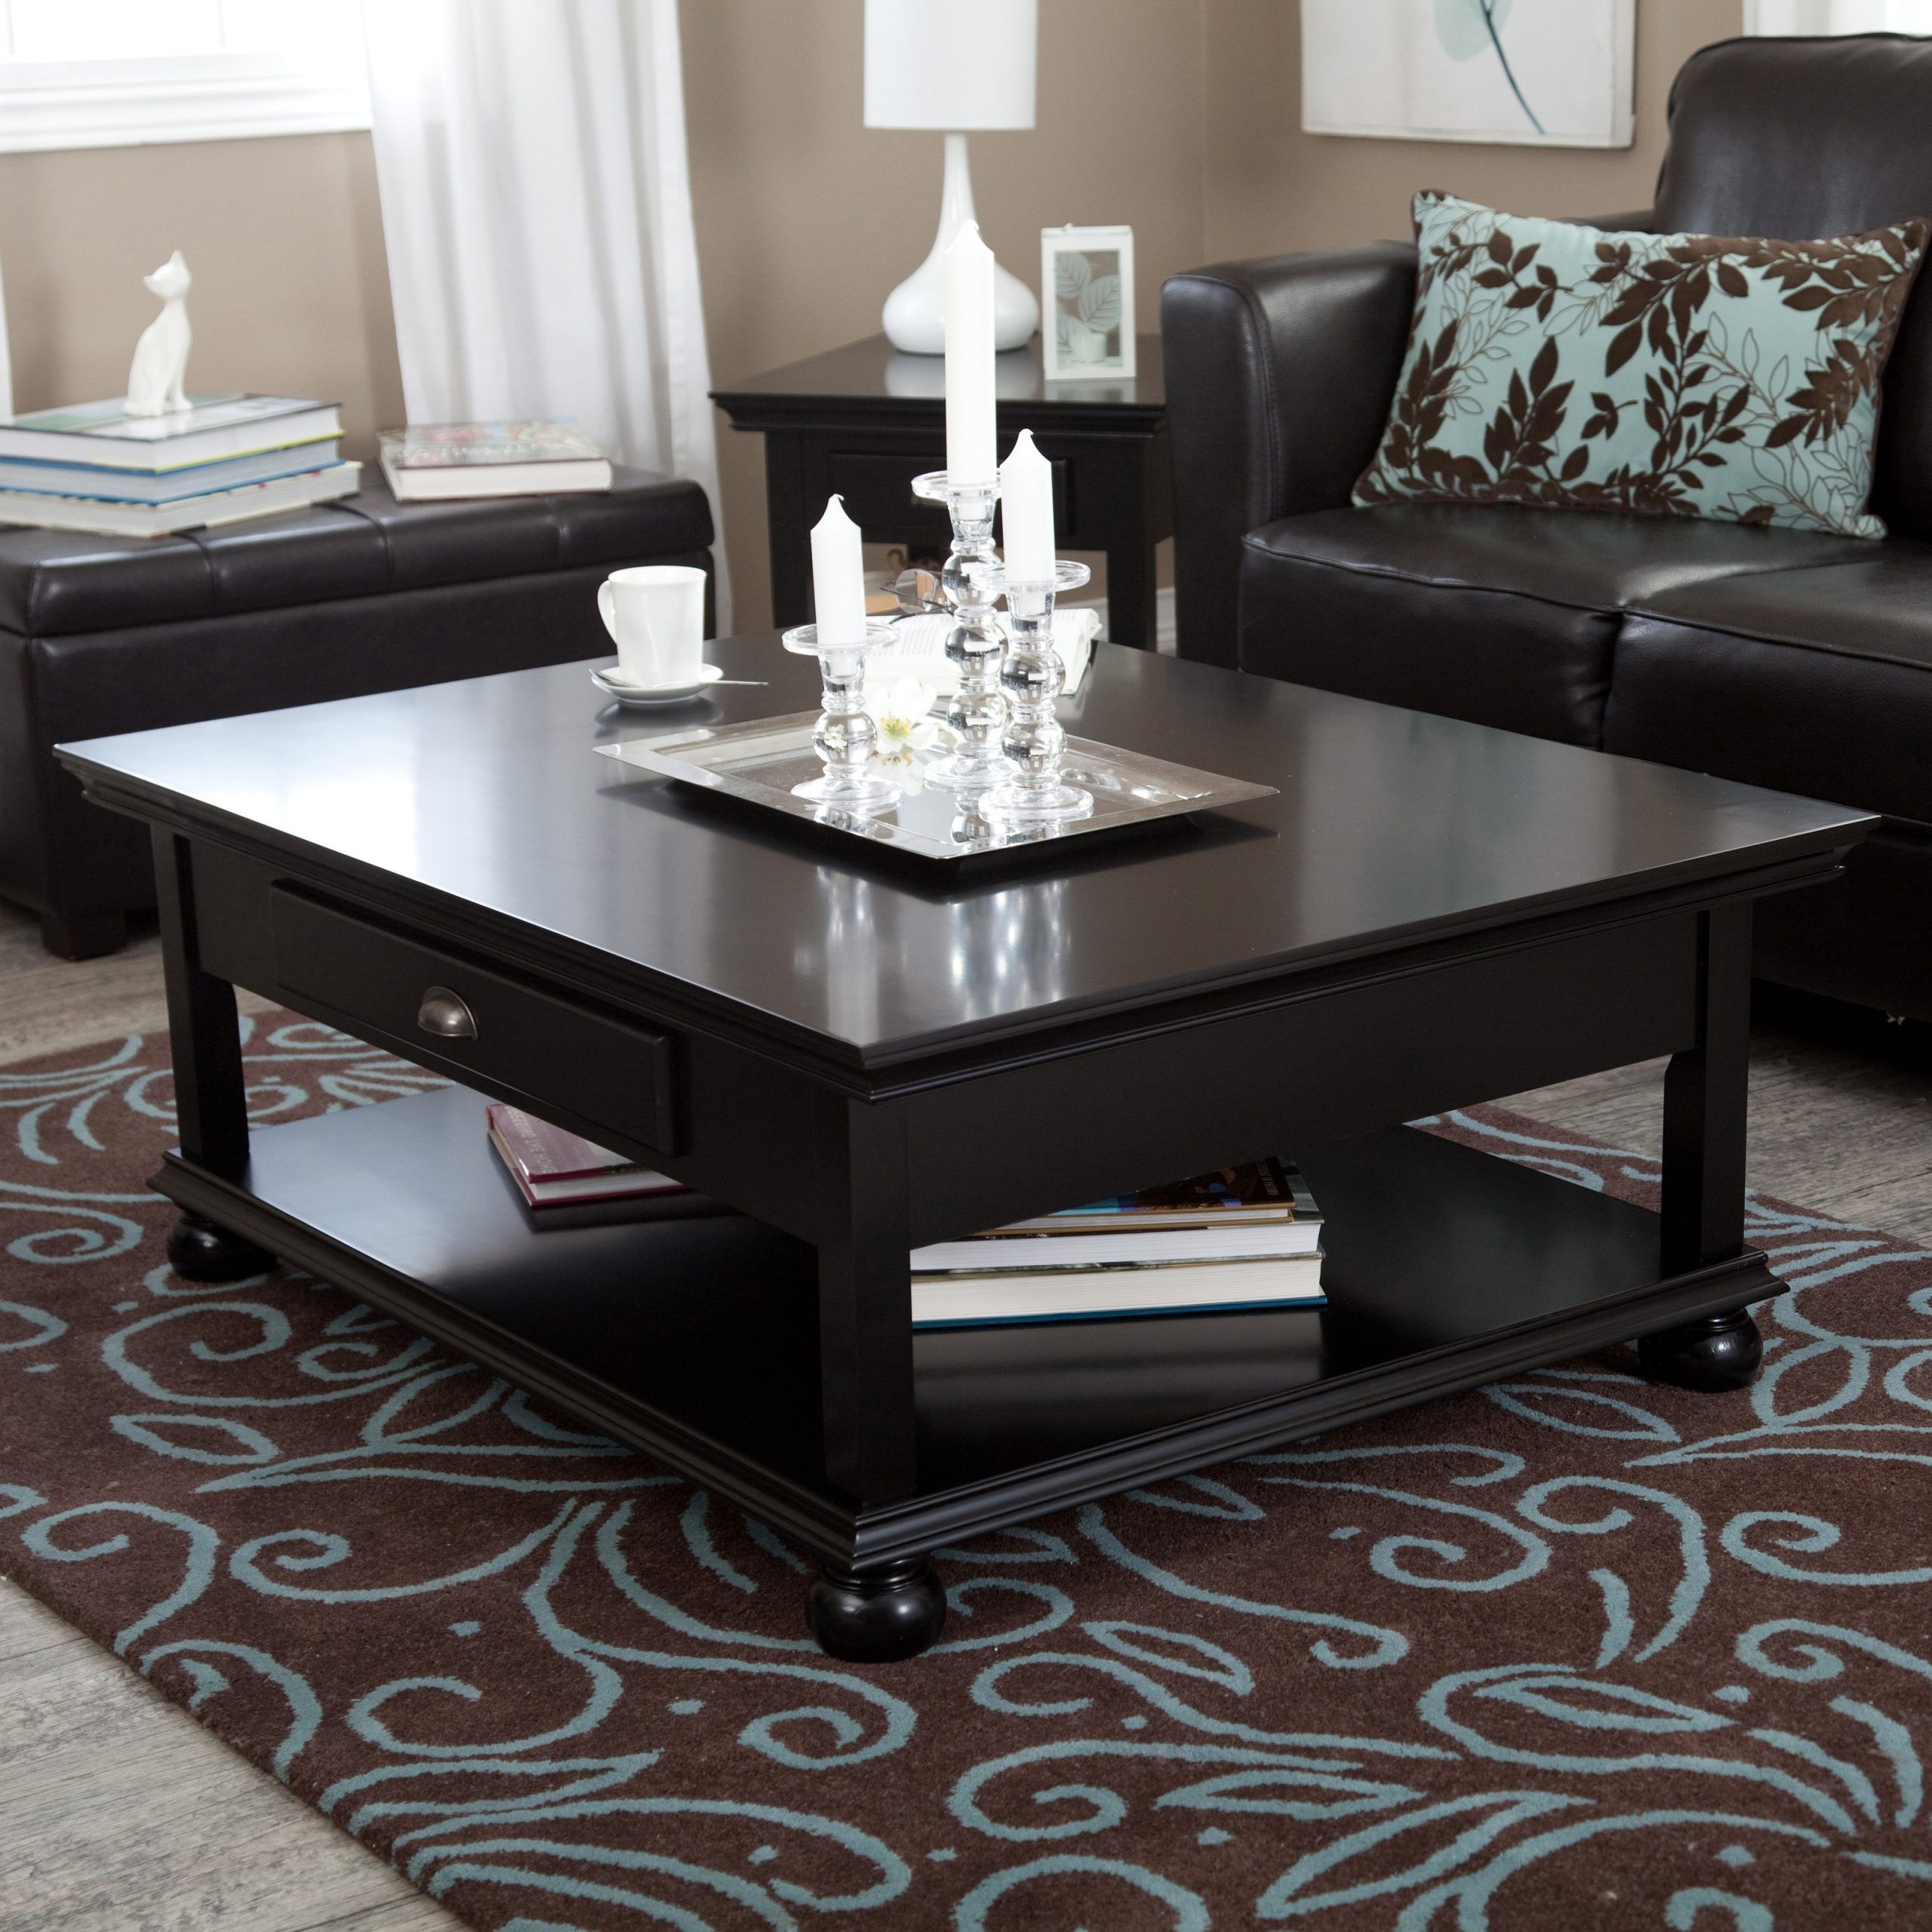 Latest Dark Coffee Bean Cocktail Tables Within Parker Coffee Table – Black At Hayneedle (Gallery 3 of 20)